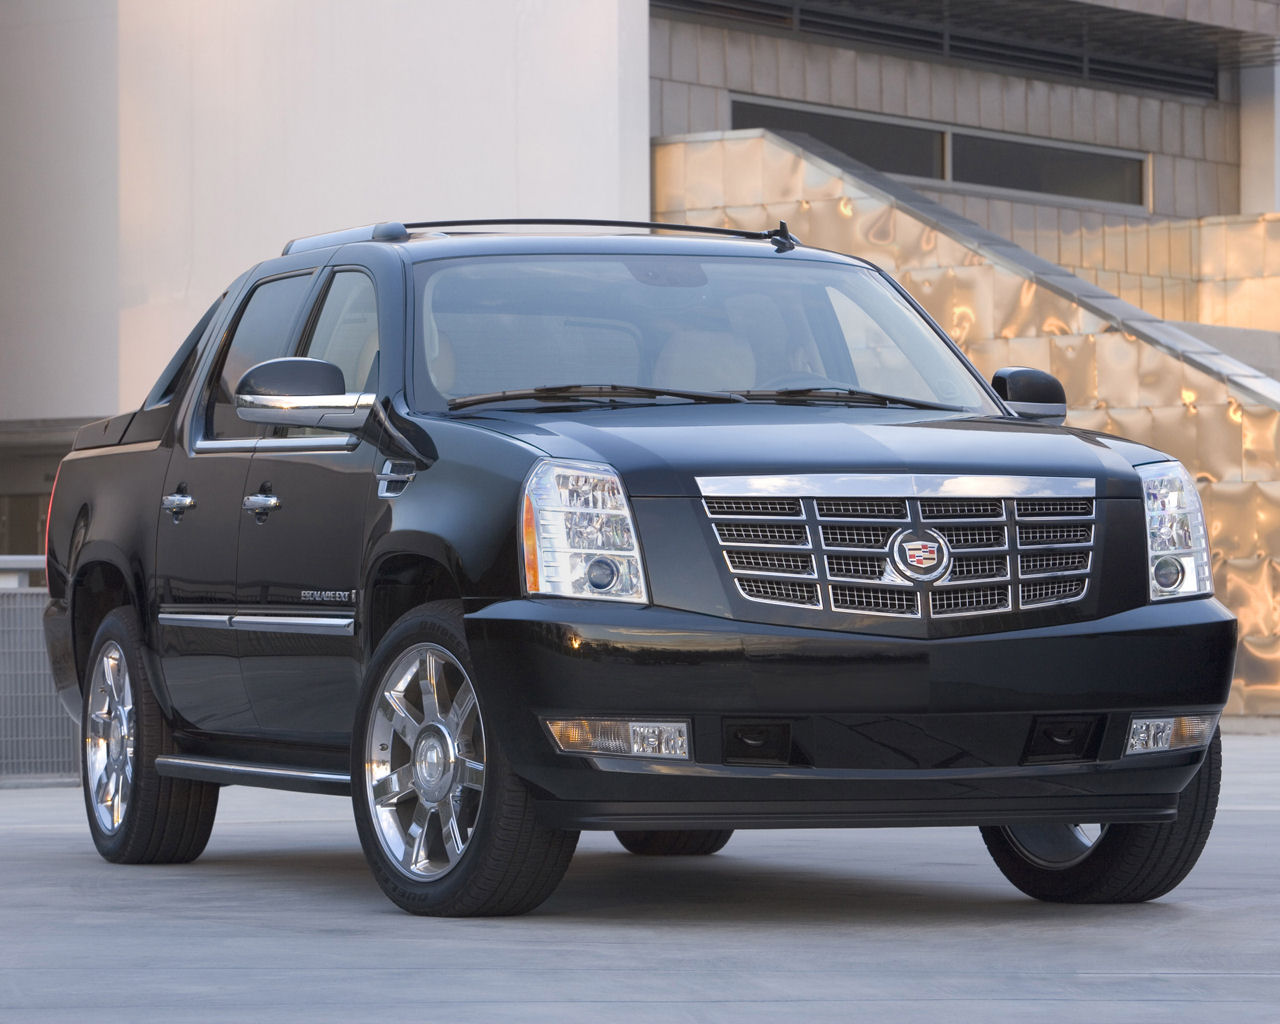 Please Right Click On The Cadillac Escalade Wallpaper Below And